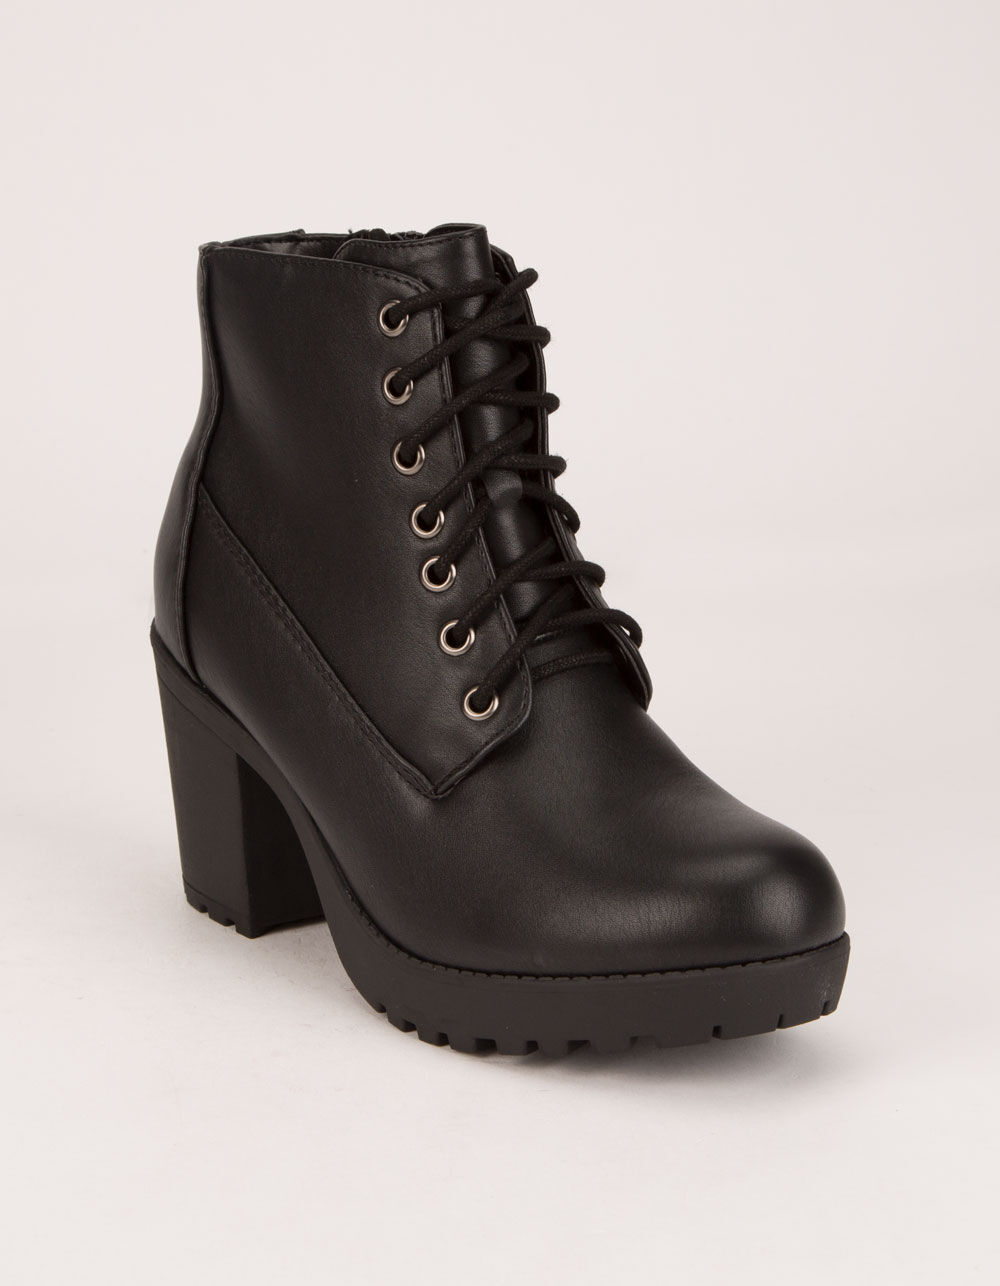 SODA Lug Sole Lace Up Womens Booties - BLK/BLK | Tillys